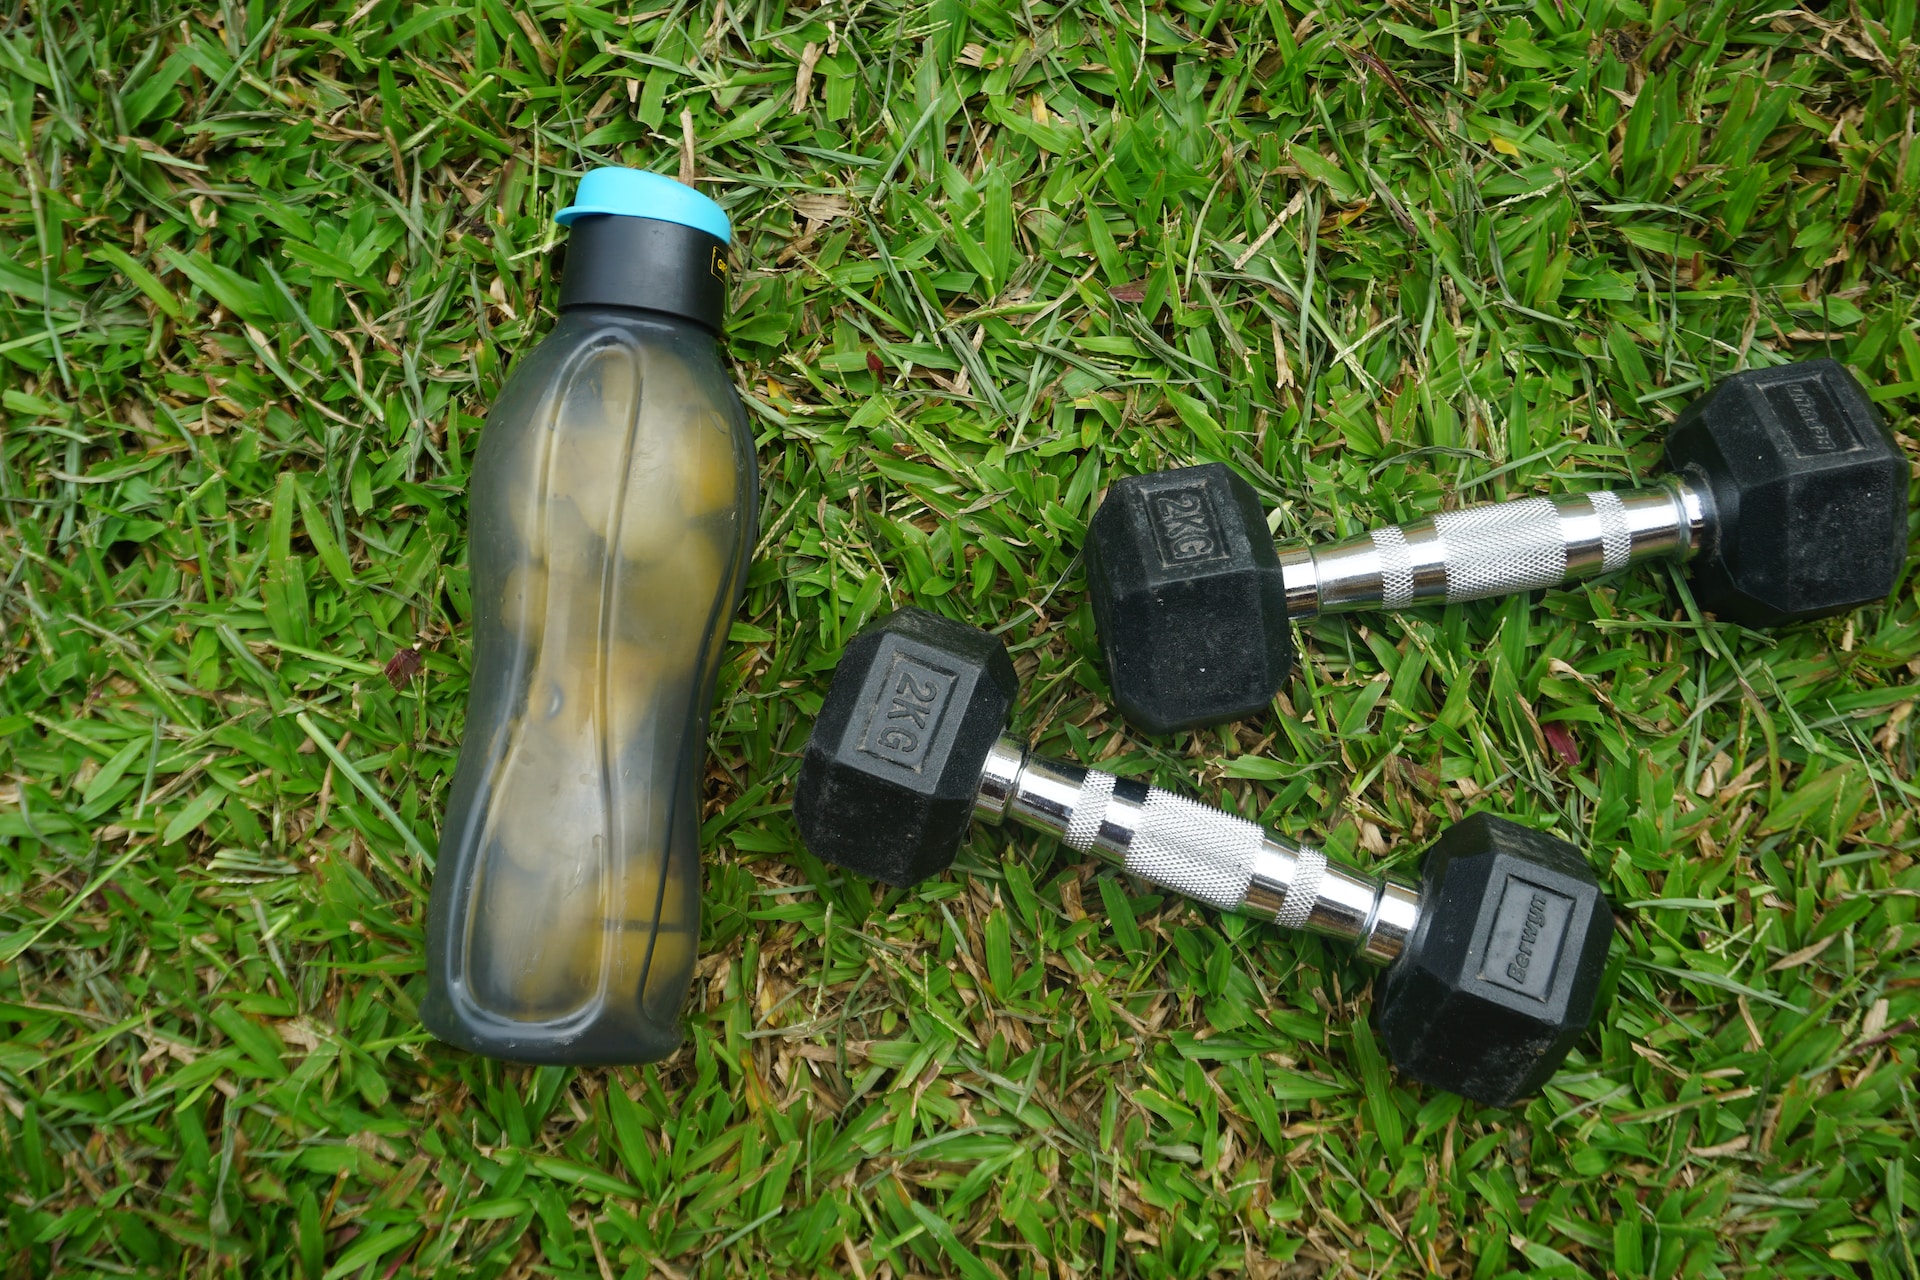 the image shows a bottle of water and dumbbells on the grass